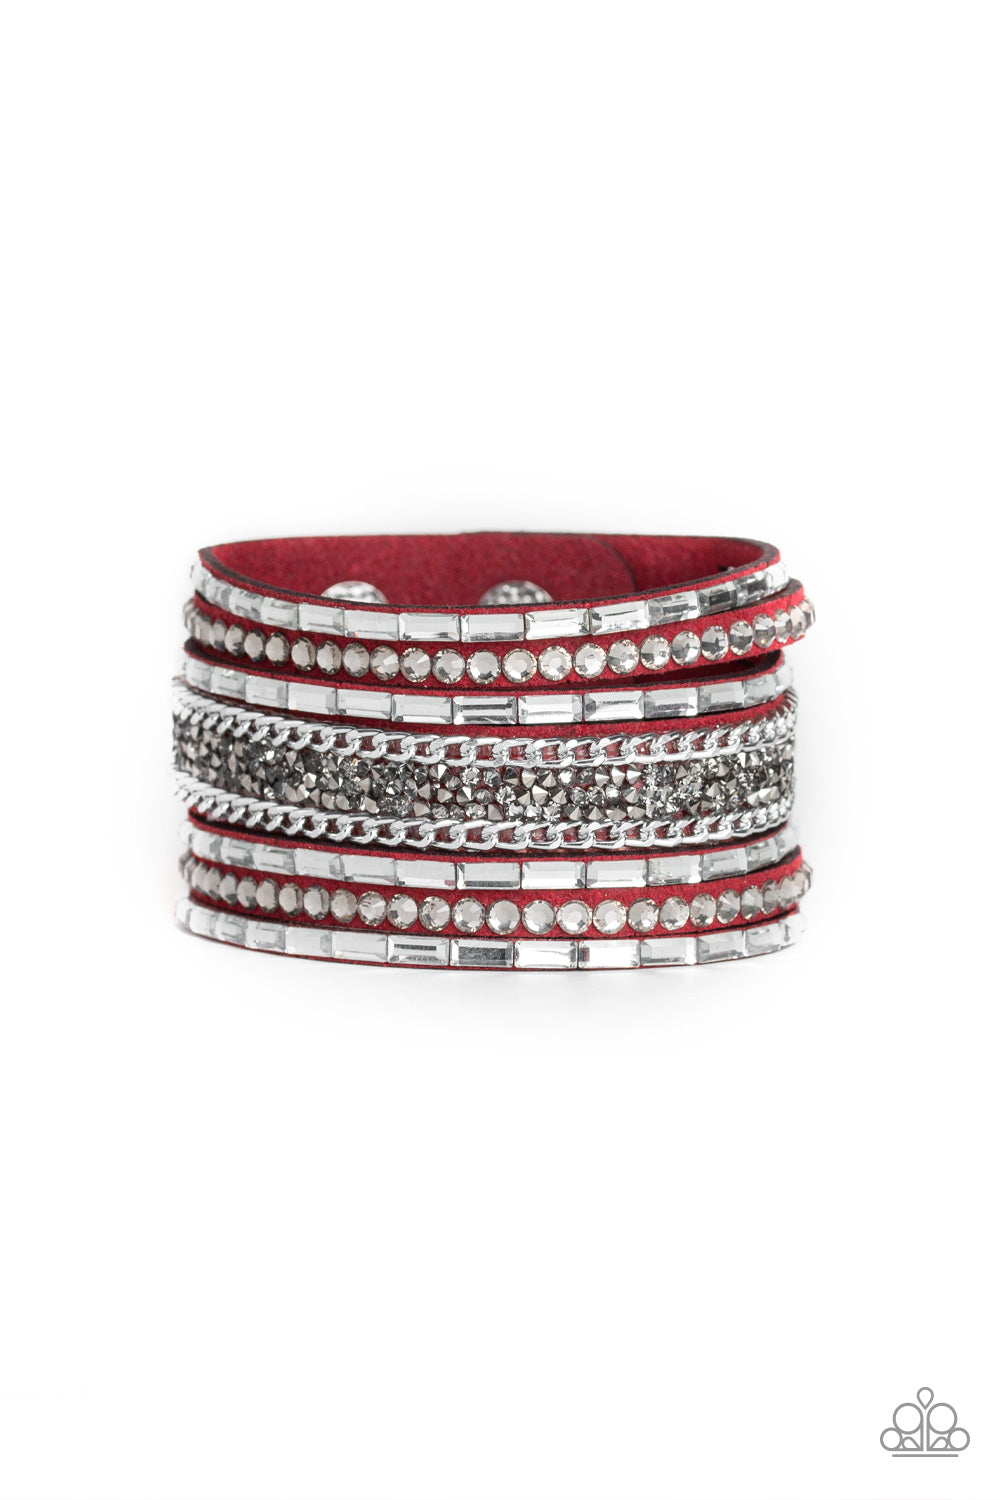 White emerald-cut rhinestones, smoky round rhinestones, and metallic prism-shaped rhinestones are sprinkled along strands of red suede. Shimmery silver chain is added to the mix for a sassy industrial finish. Features an adjustable snap closure.